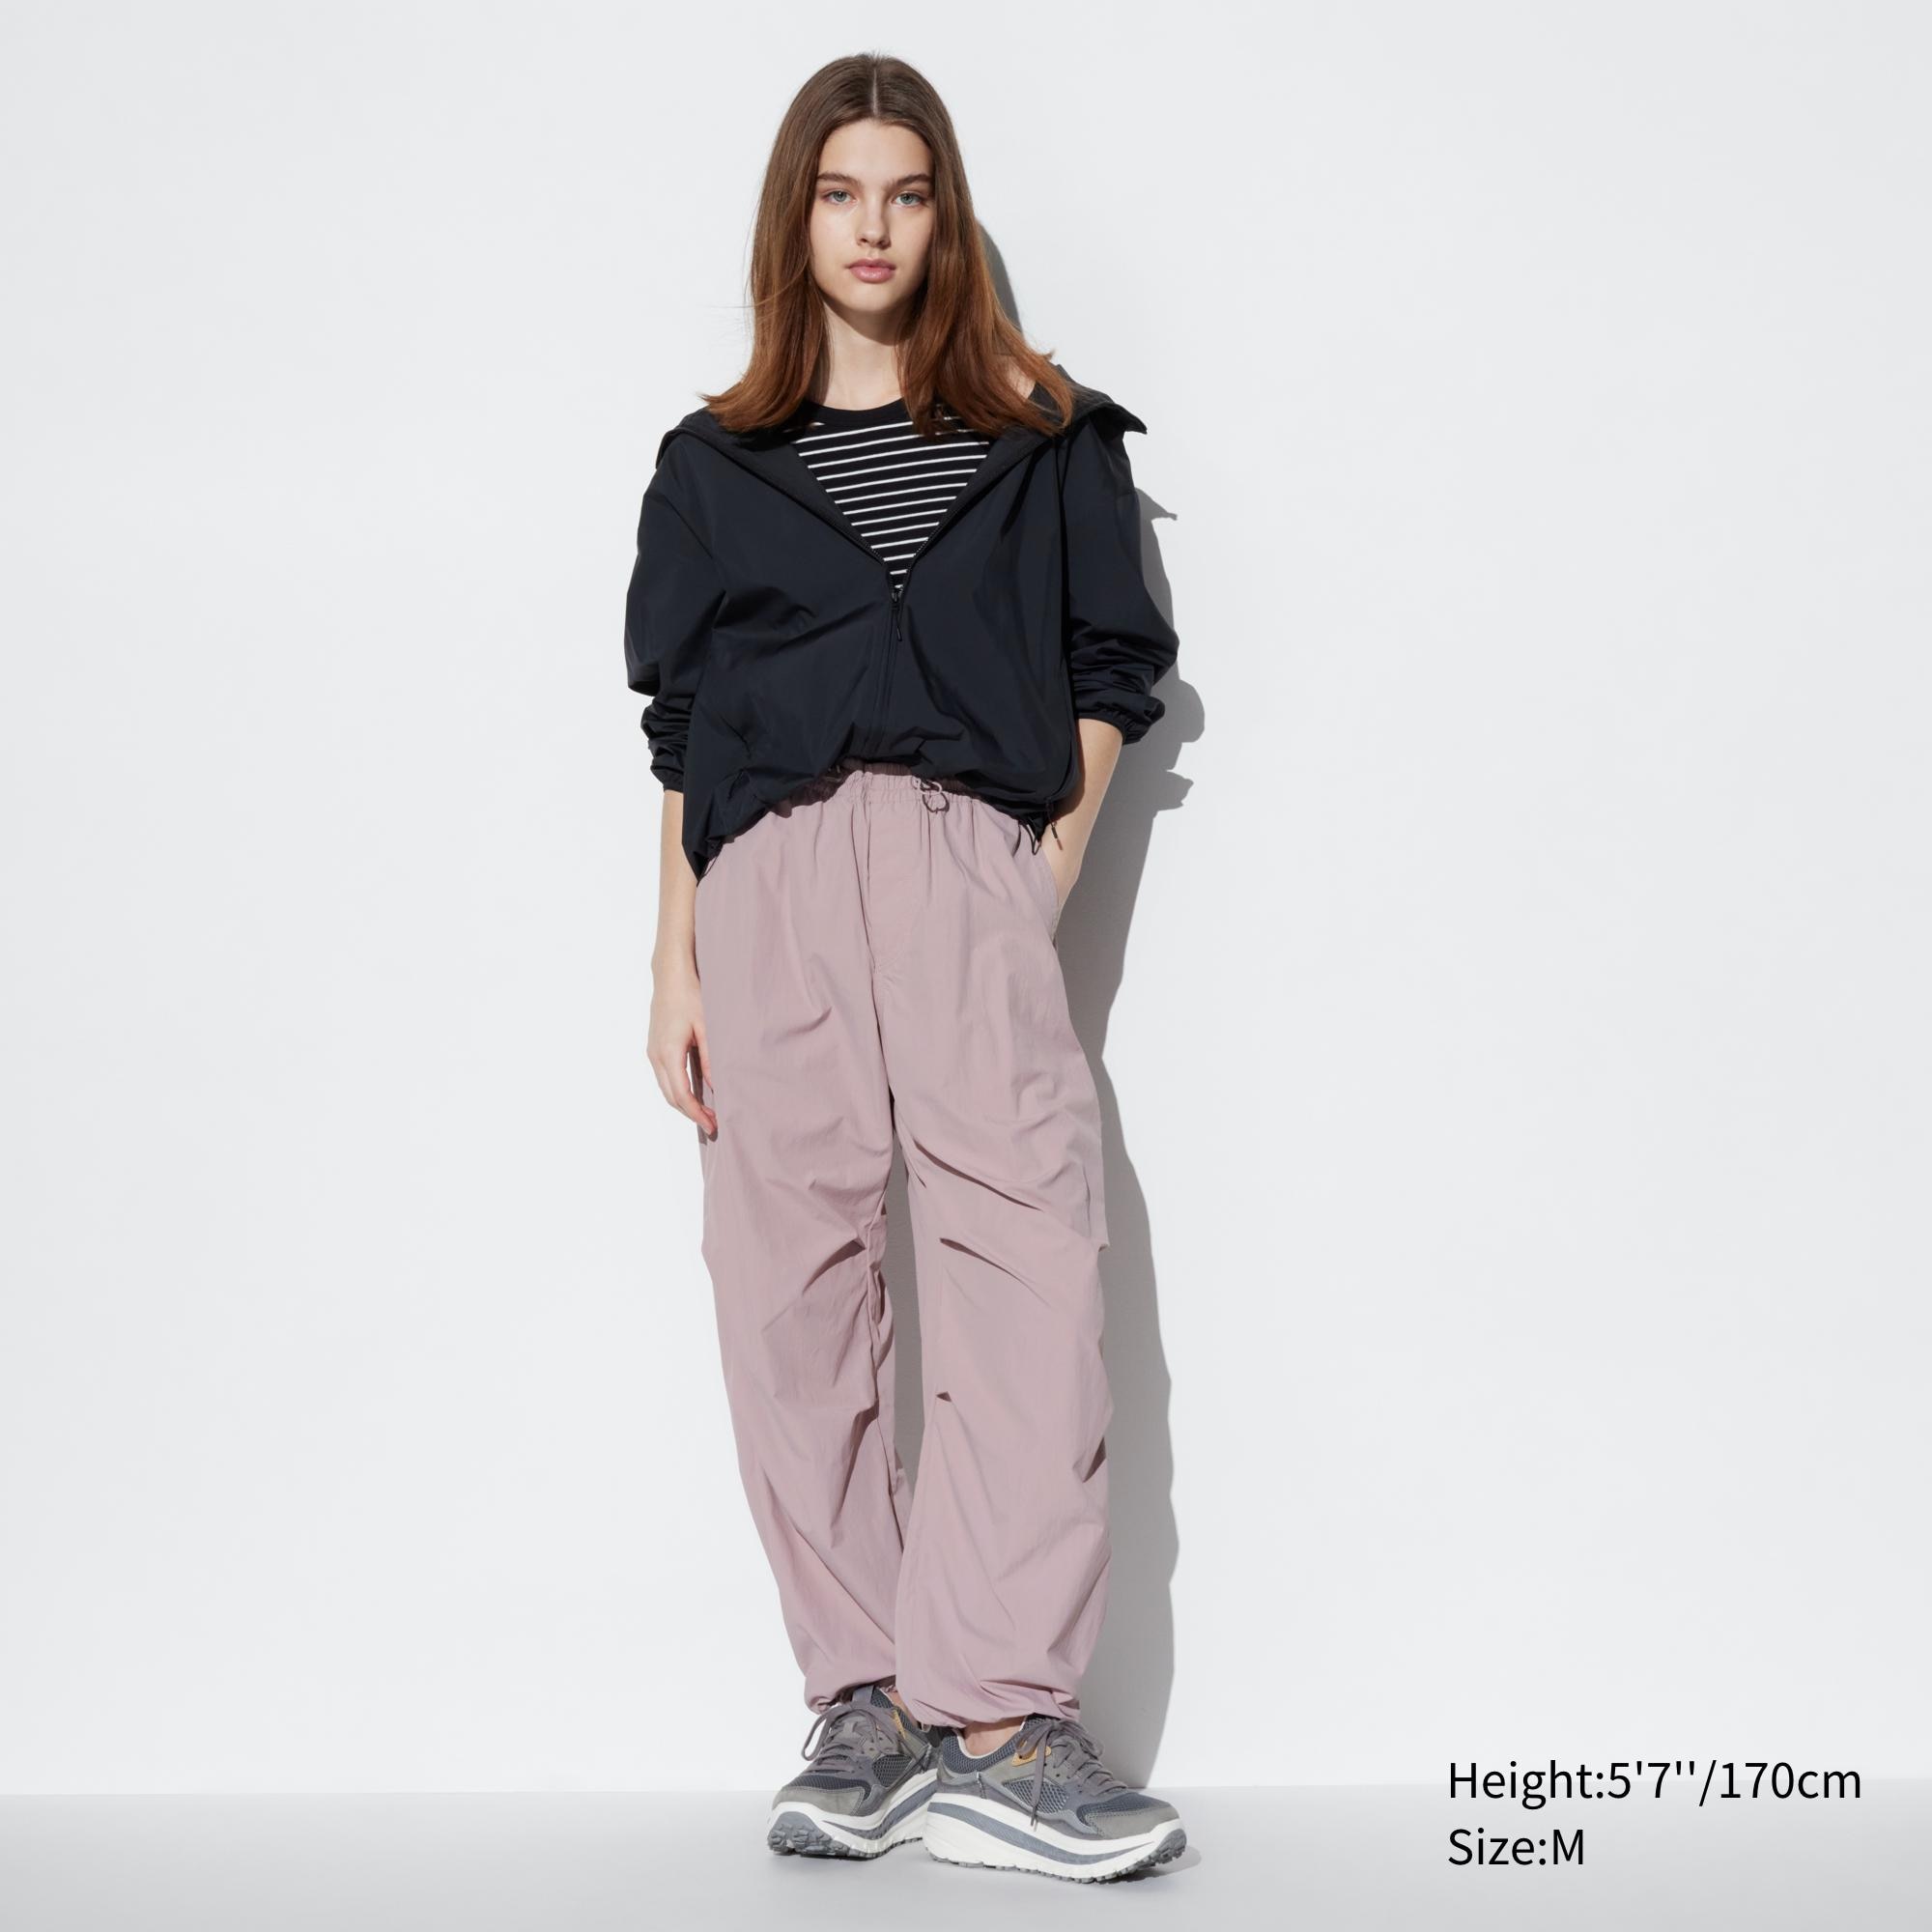 Shop looks for「Parachute Pants」| UNIQLO IN